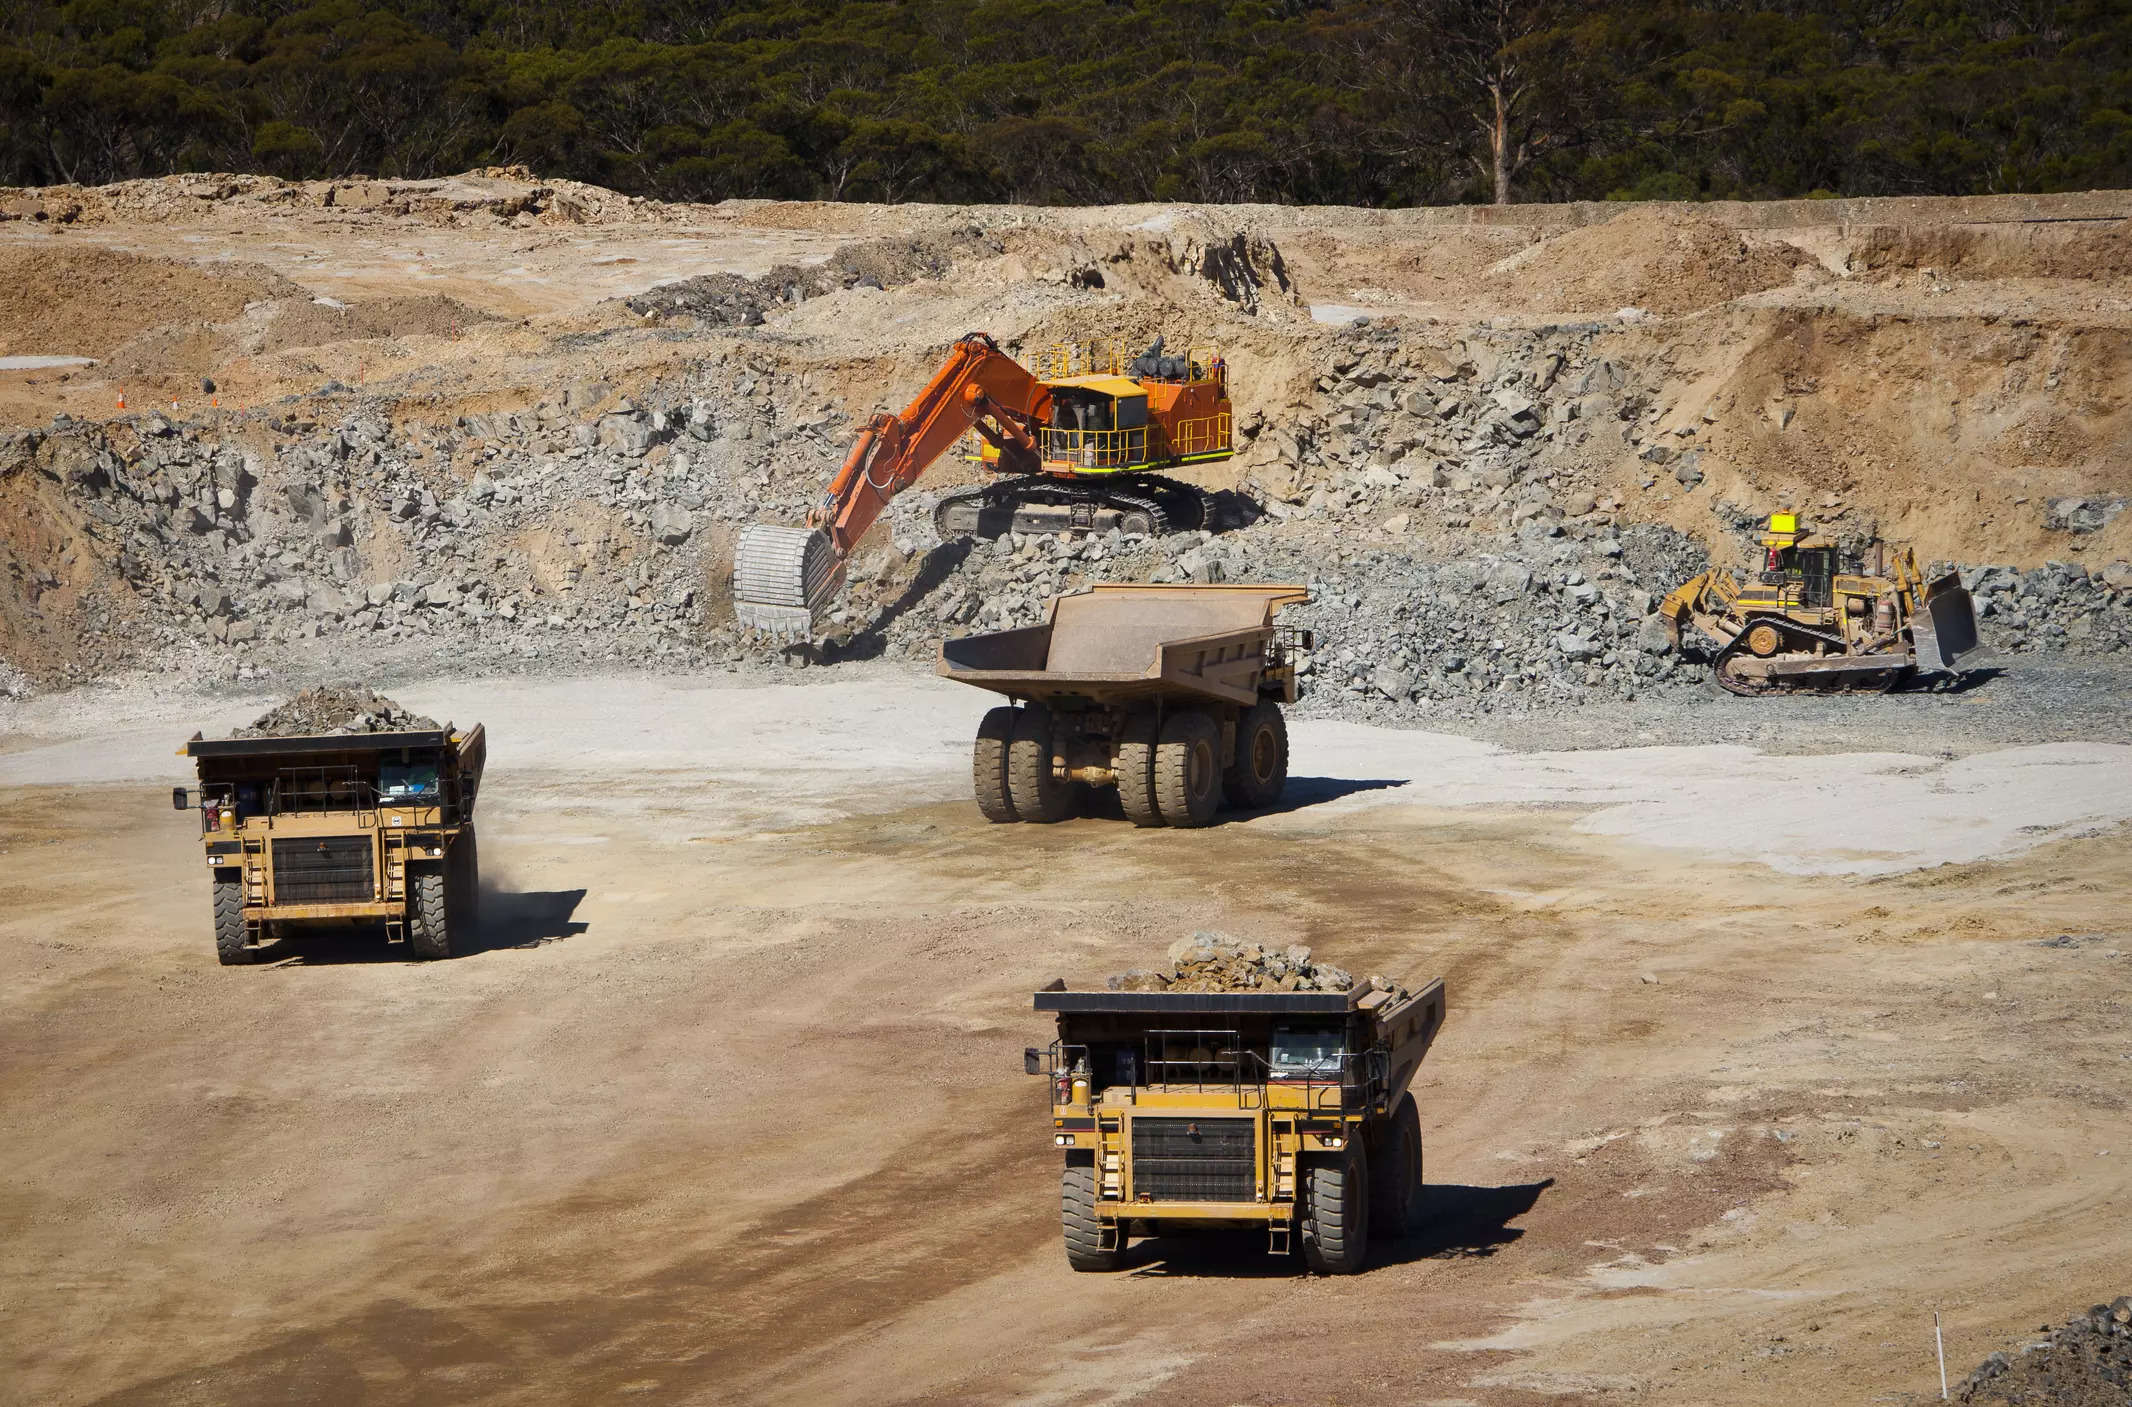 The mining industry is grappling with its paradoxical role as supplier of copper, lithium and other building blocks for renewable technologies even as operations contribute to global warming.